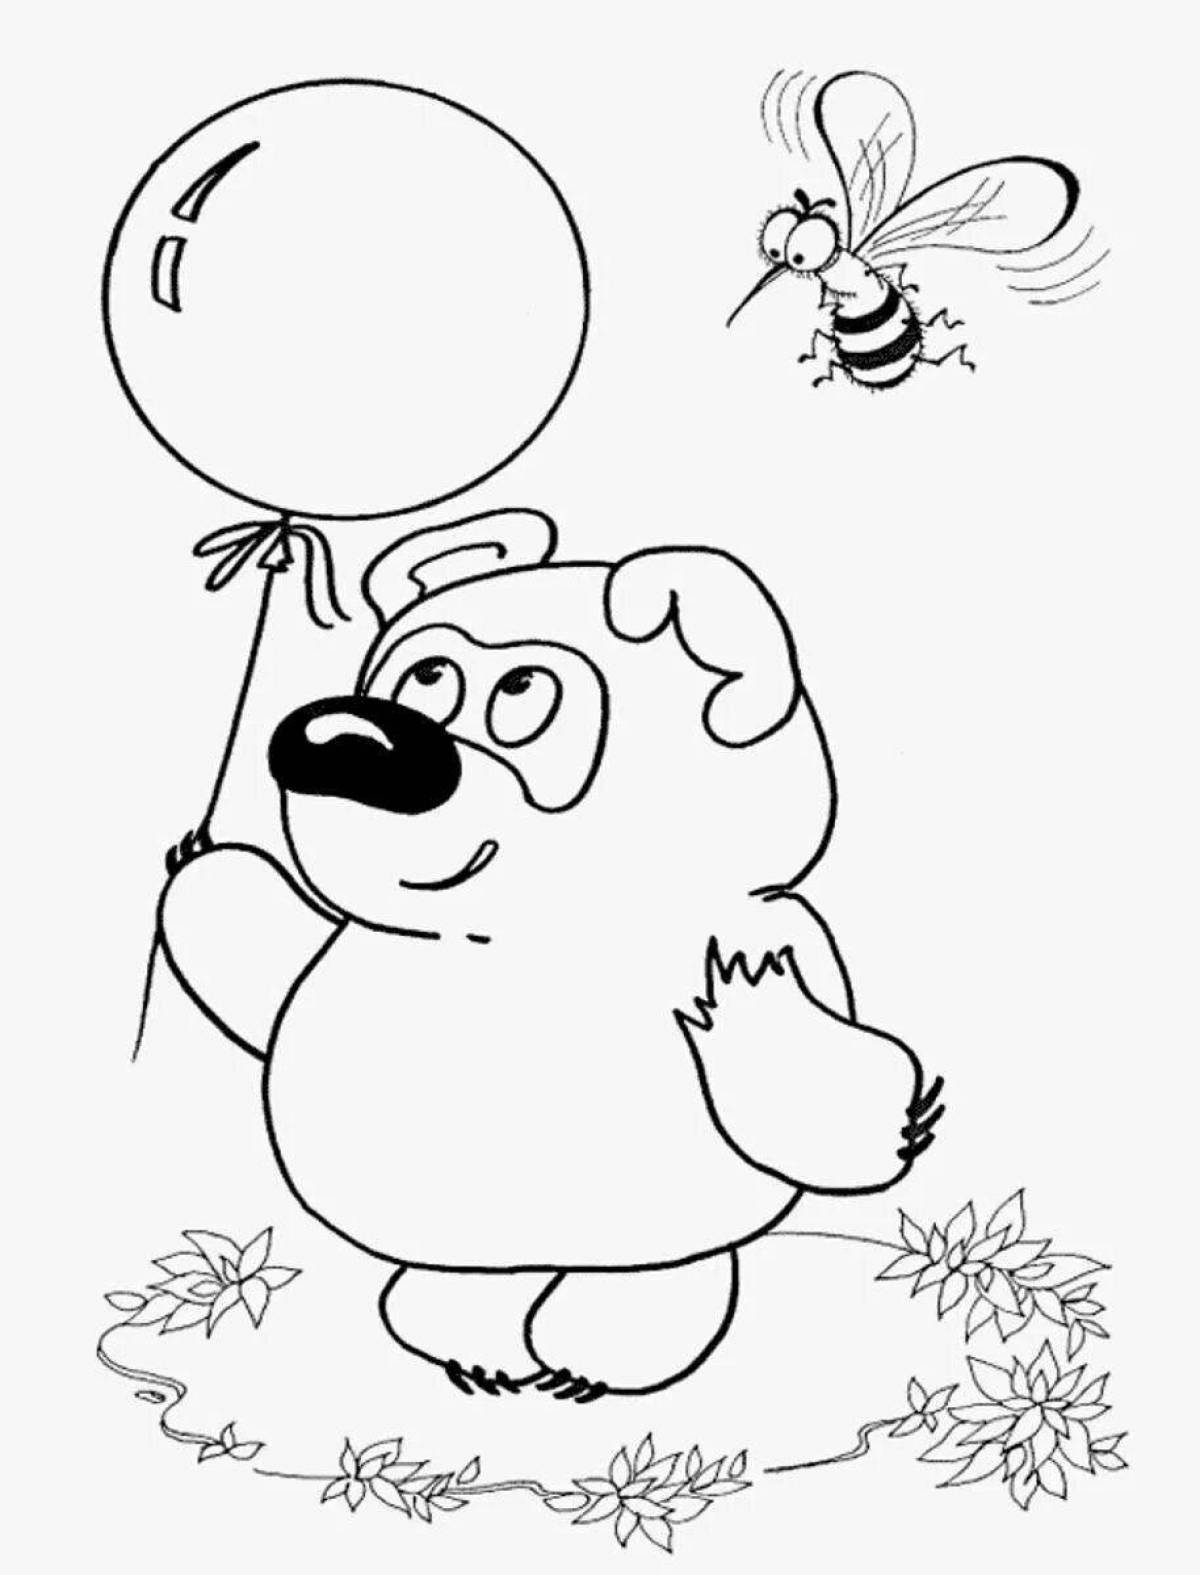 Winnie the pooh with balloon #8